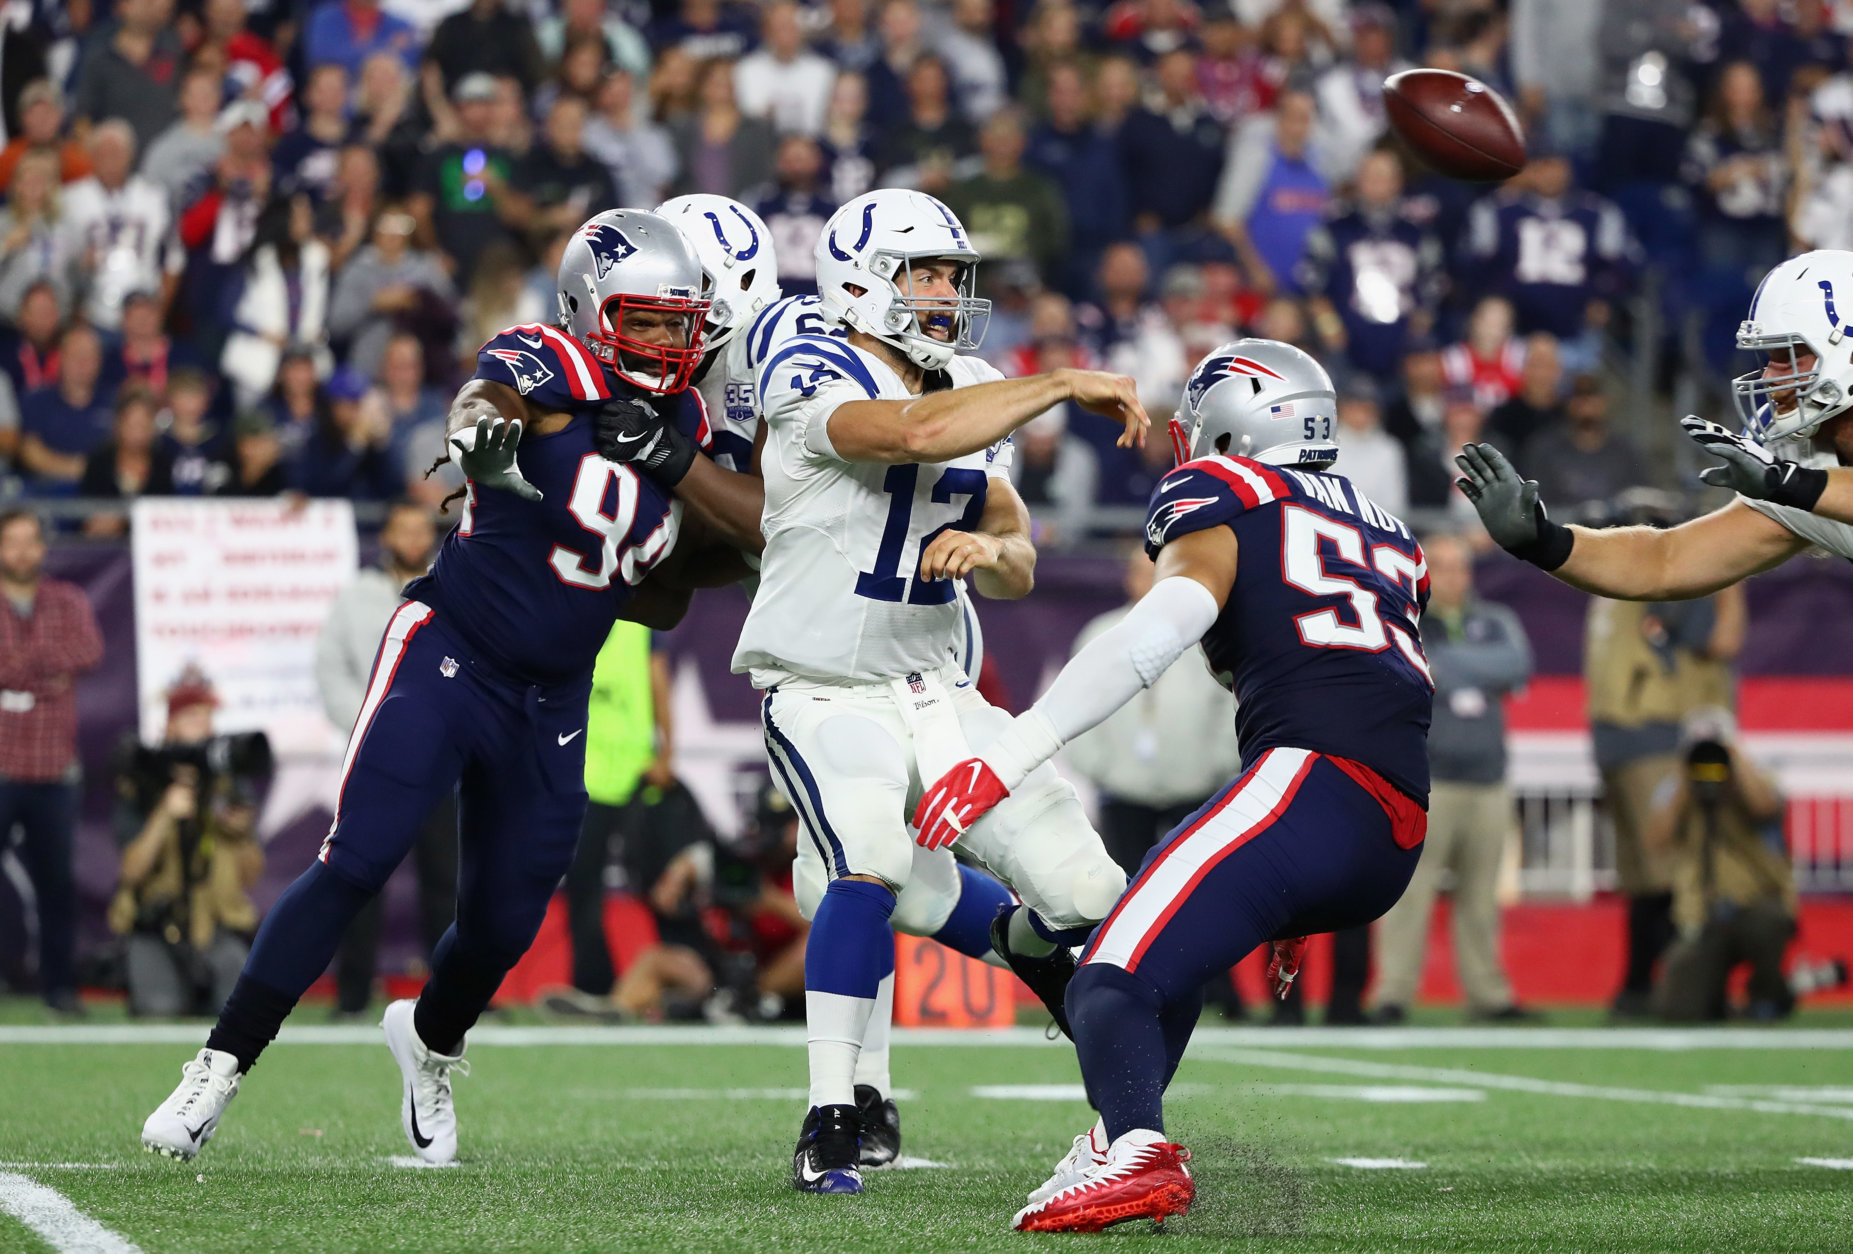 FOXBOROUGH, MA - OCTOBER 04:  Andrew Luck #12 of the Indianapolis Colts throws a pass during the second half against the New England Patriots at Gillette Stadium on October 4, 2018 in Foxborough, Massachusetts.  (Photo by Adam Glanzman/Getty Images)